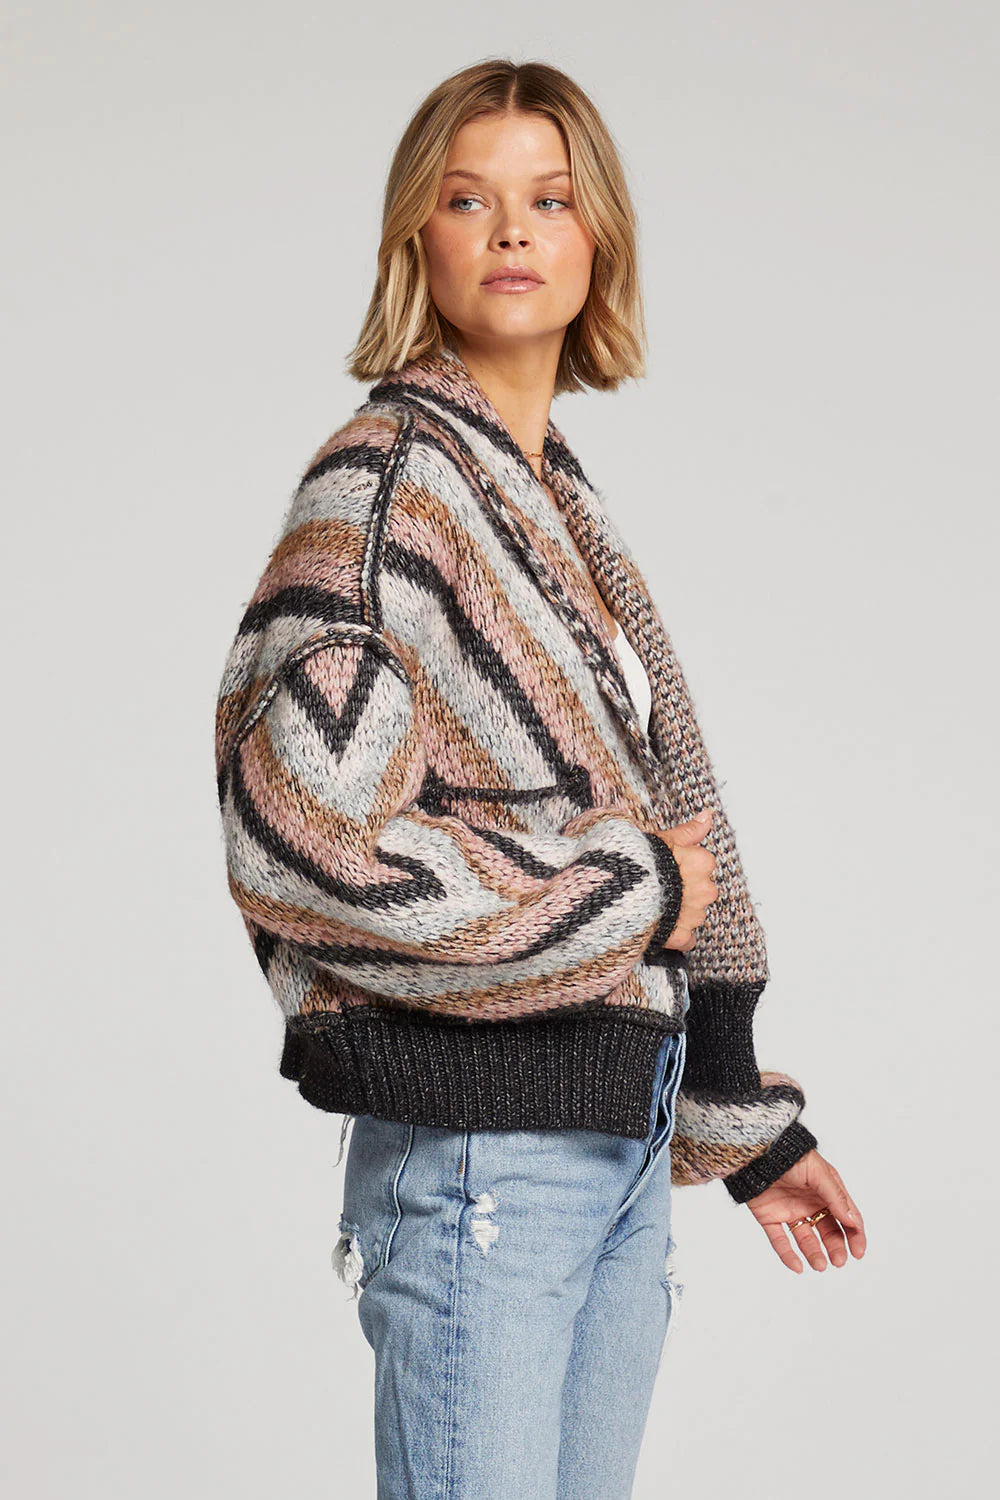 Saltwater Luxe ‘Cain Sweater’